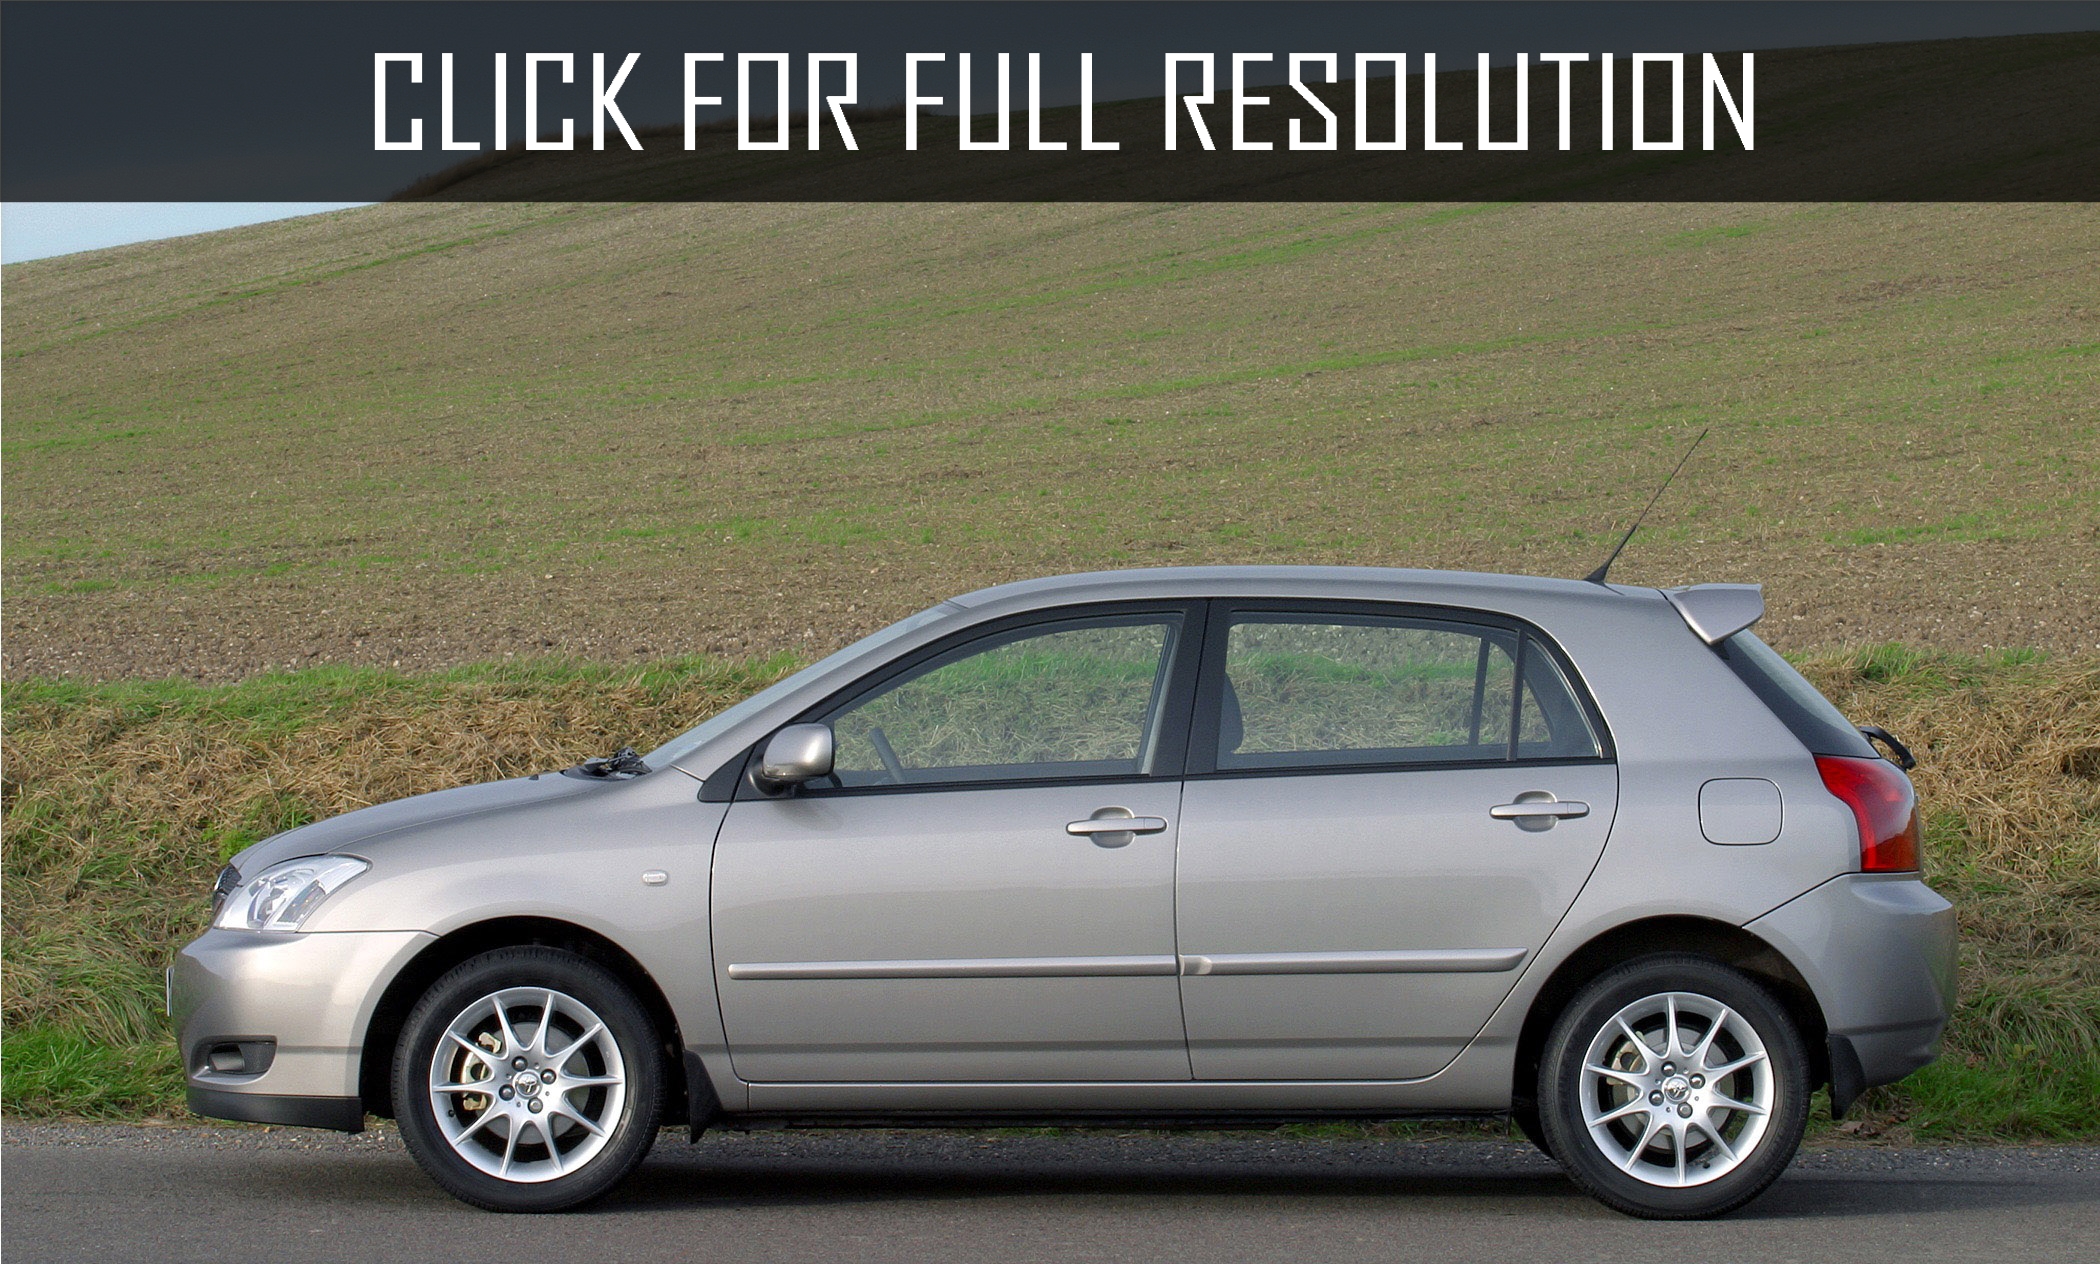 2002 Toyota Corolla S - news, reviews, msrp, ratings with amazing images